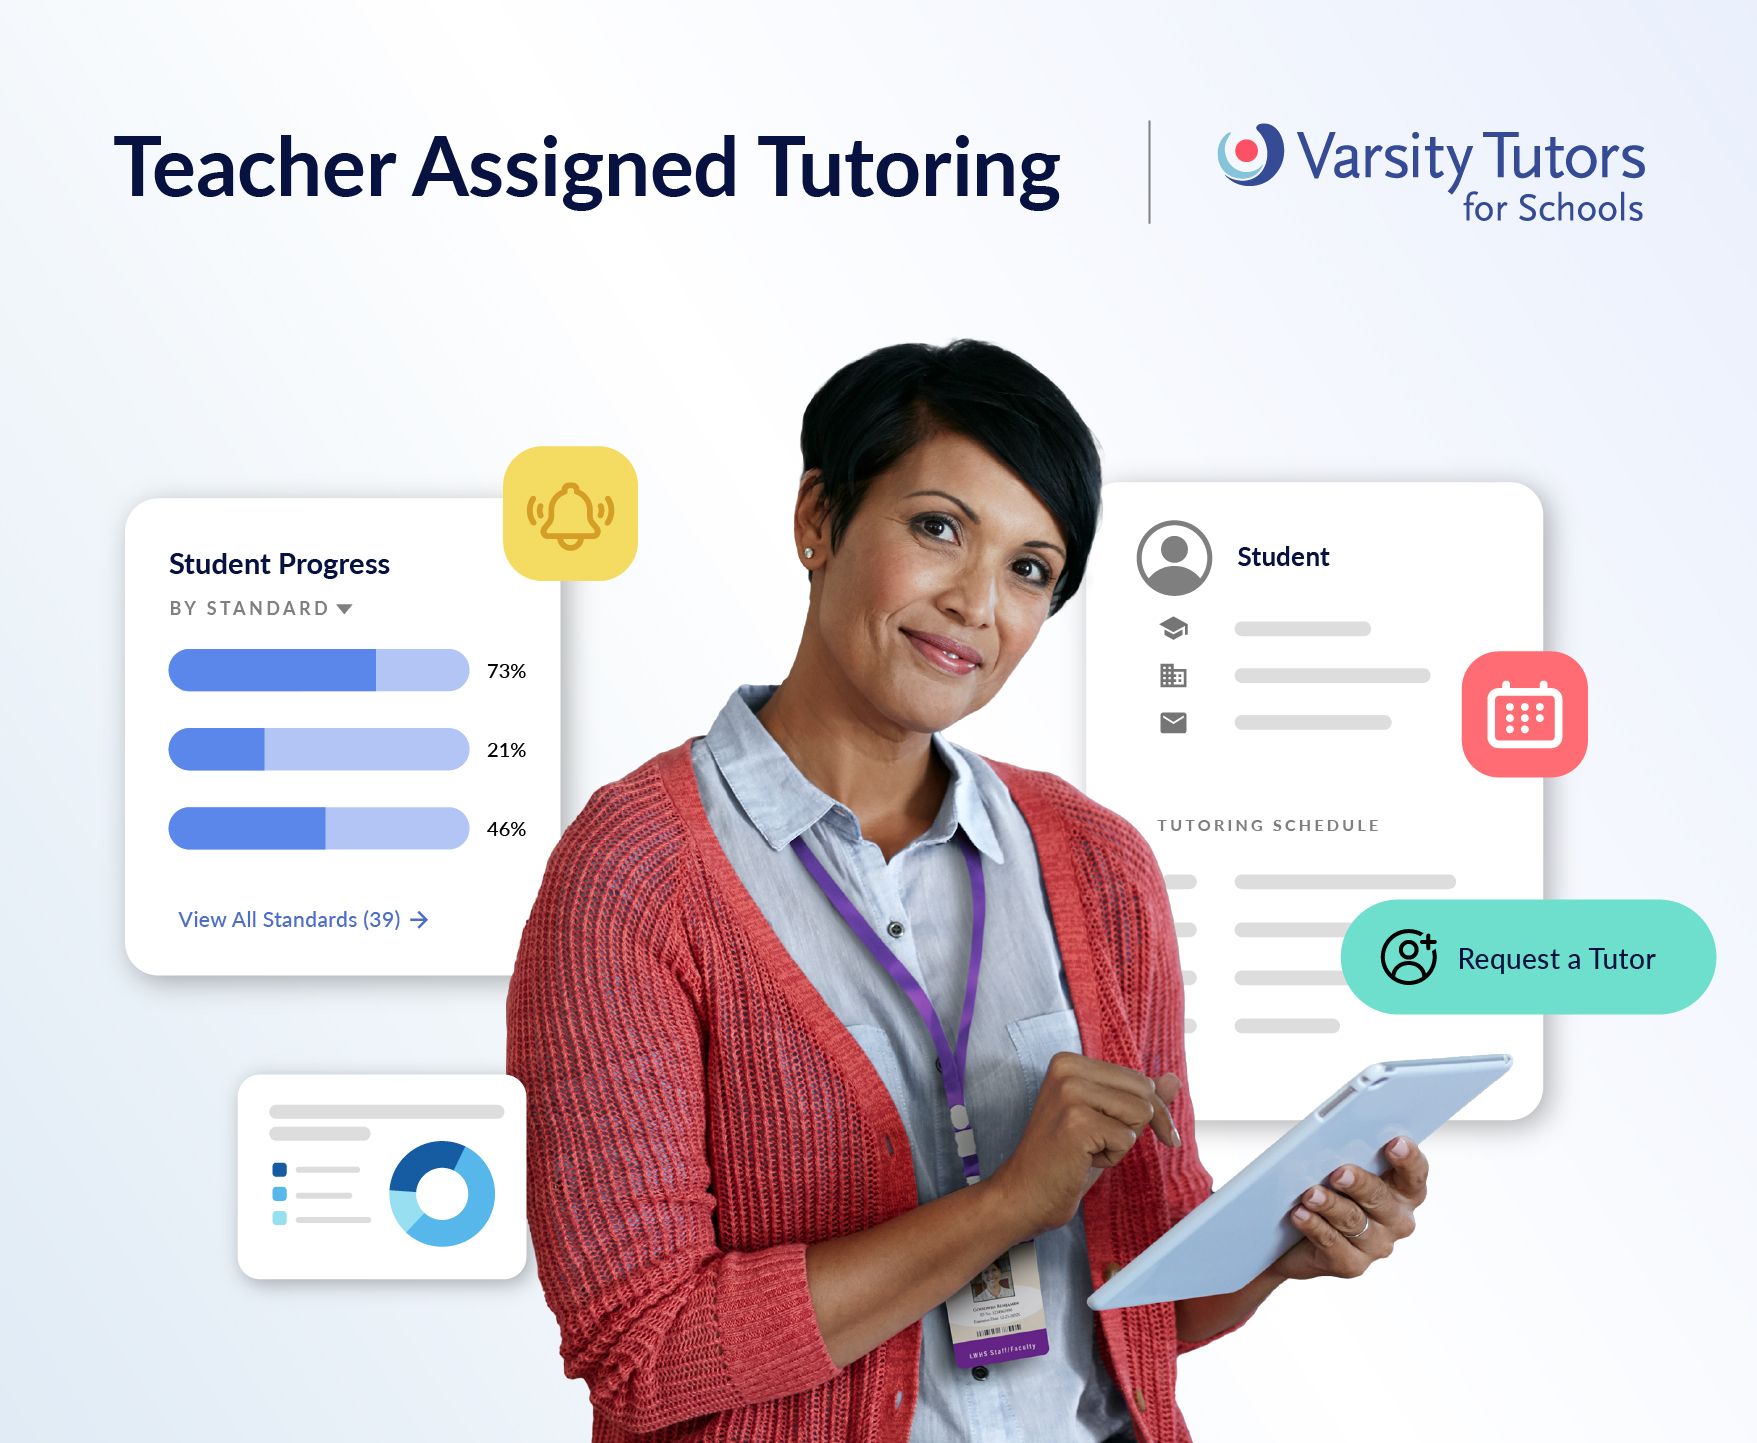 New Teacher-Driven Tutoring Enables Educators to “Prescribe” Additional Live Academic Support for Students at All Levels | Business Wire